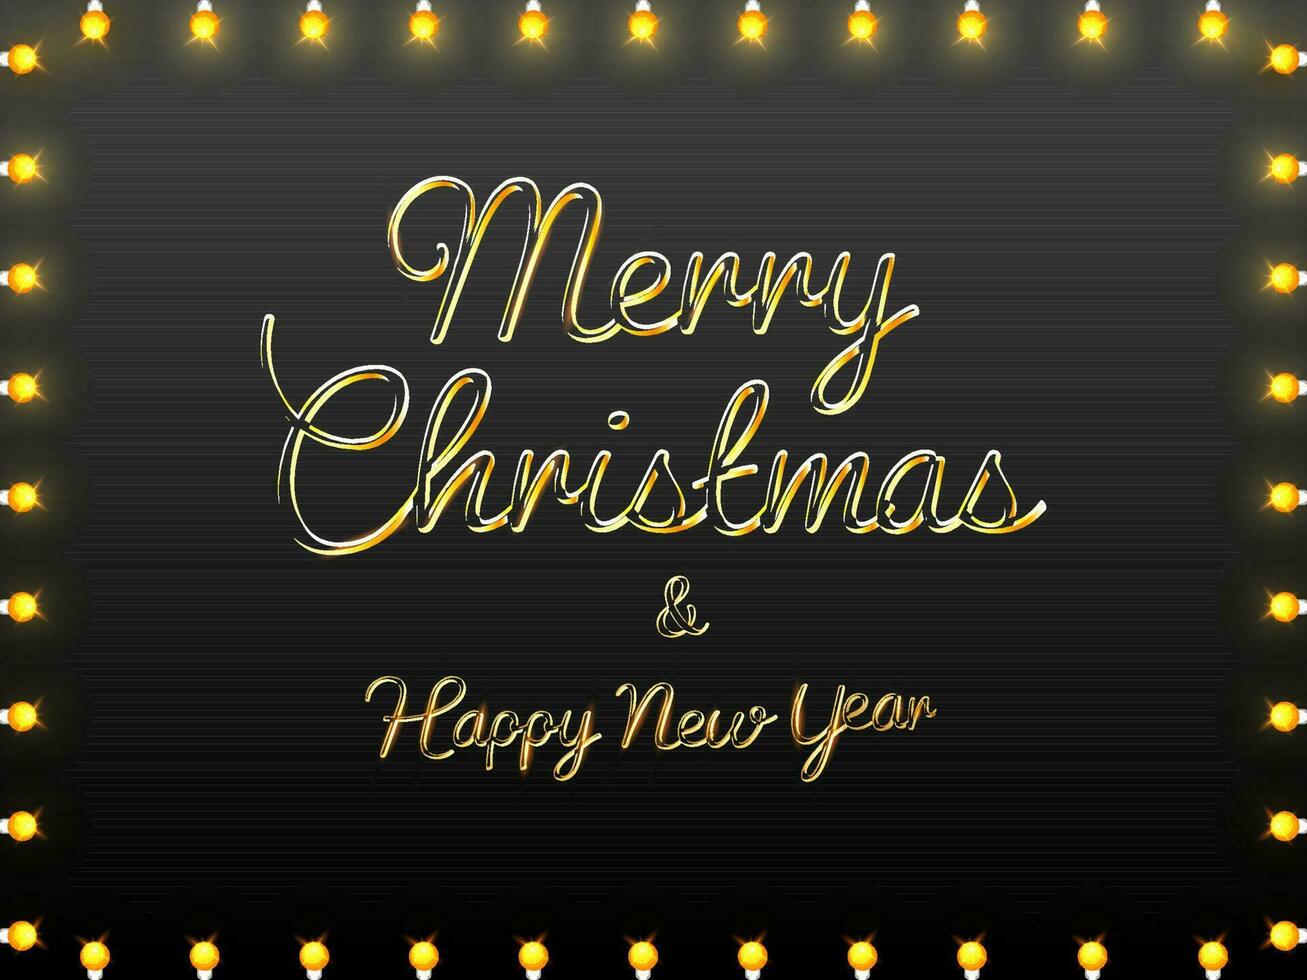 Golden Merry Christmas And Happy New Year Font And Illuminated Light Bulb Decorative Border On Black Background. vector